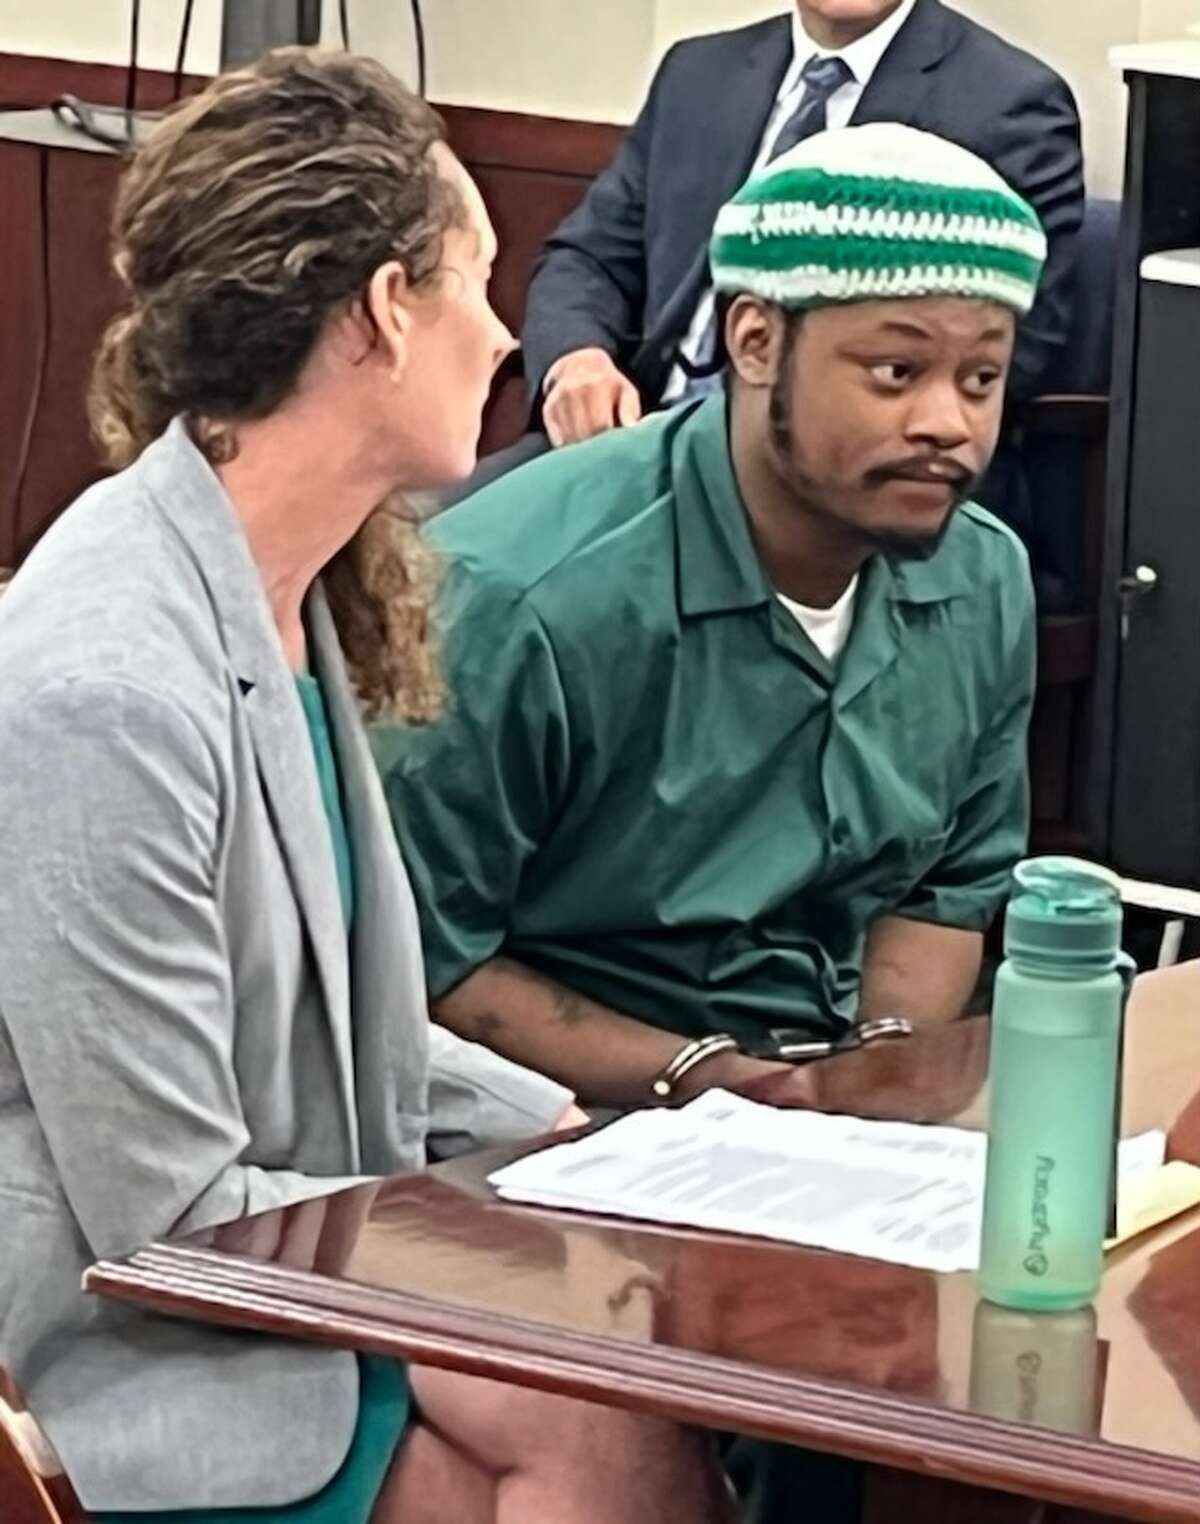 Jhajuan Sabb and his attorney, Assistant Public Defender Angela Kelley appear in Albany County court Friday where Sabb was sentenced to decades in prison in the fatal shooting last year of beloved West Hill grocery store worker, Sharaf Addailam, and wounding another man.